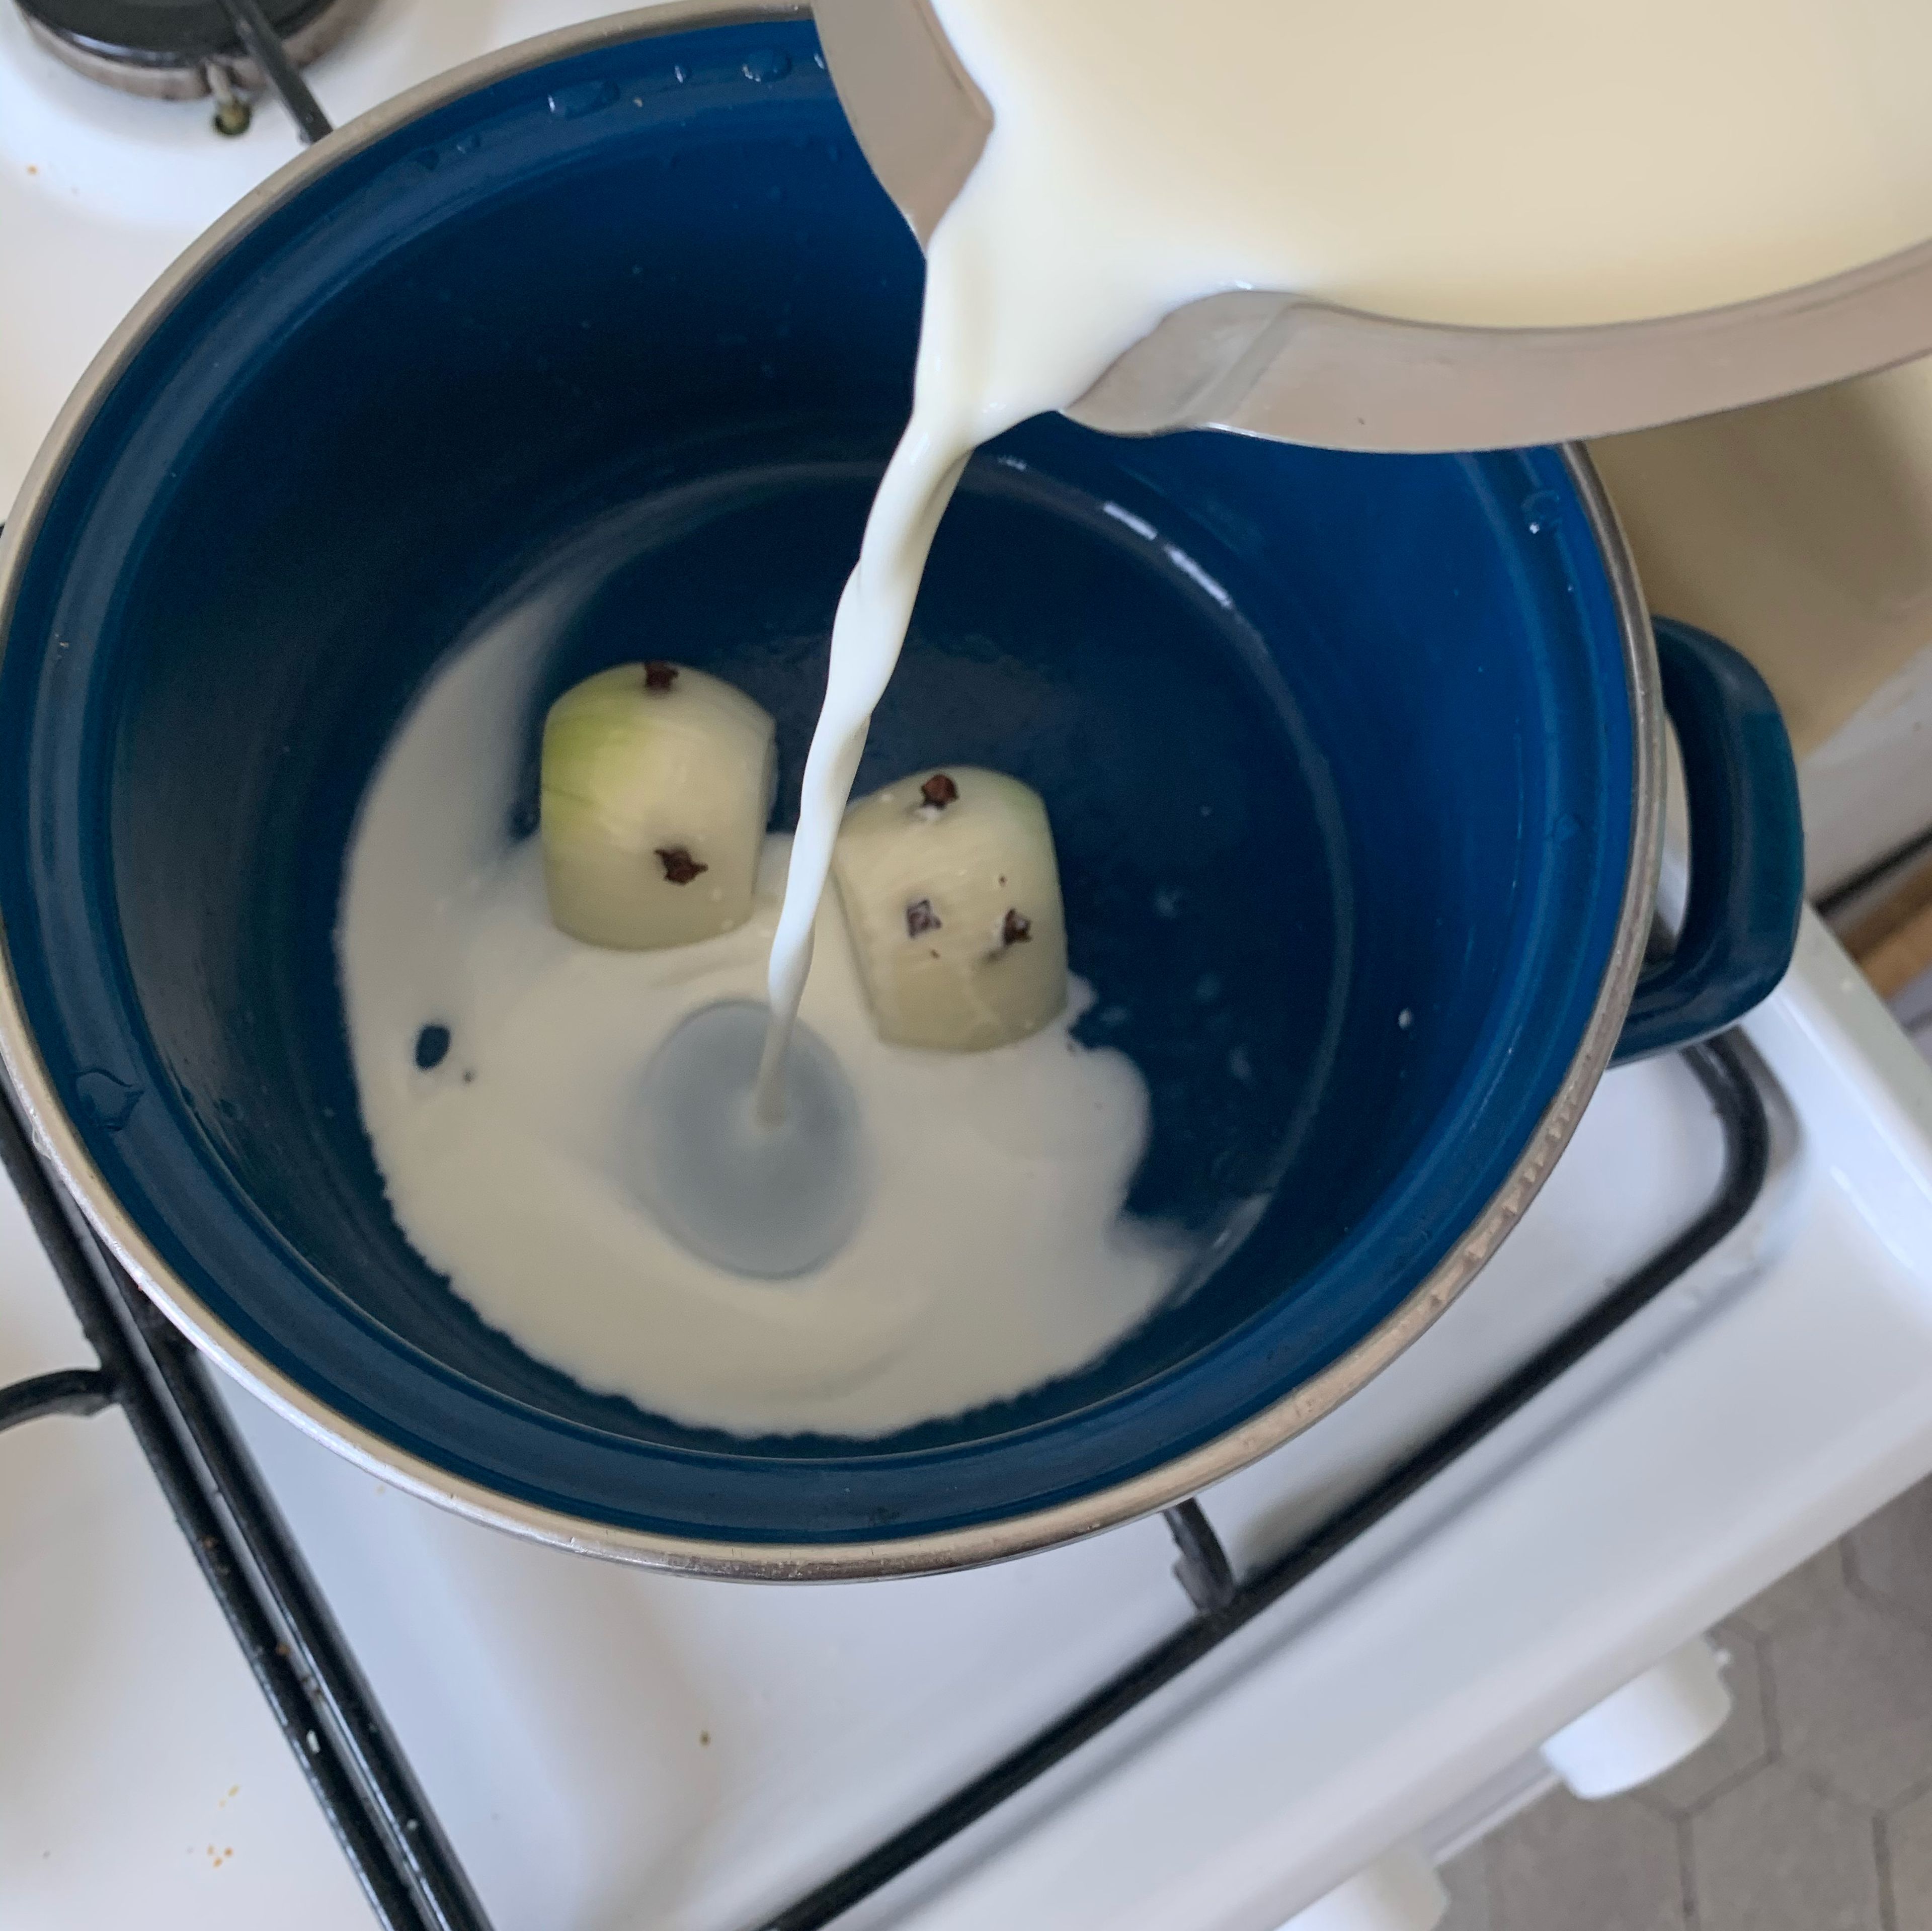 Peel a small or half an onion and spike it with cloves. Bring the milk with the spiked onion to a boil and let it rest next to the heat for approx. 10 min. Then remove onion from the milk.